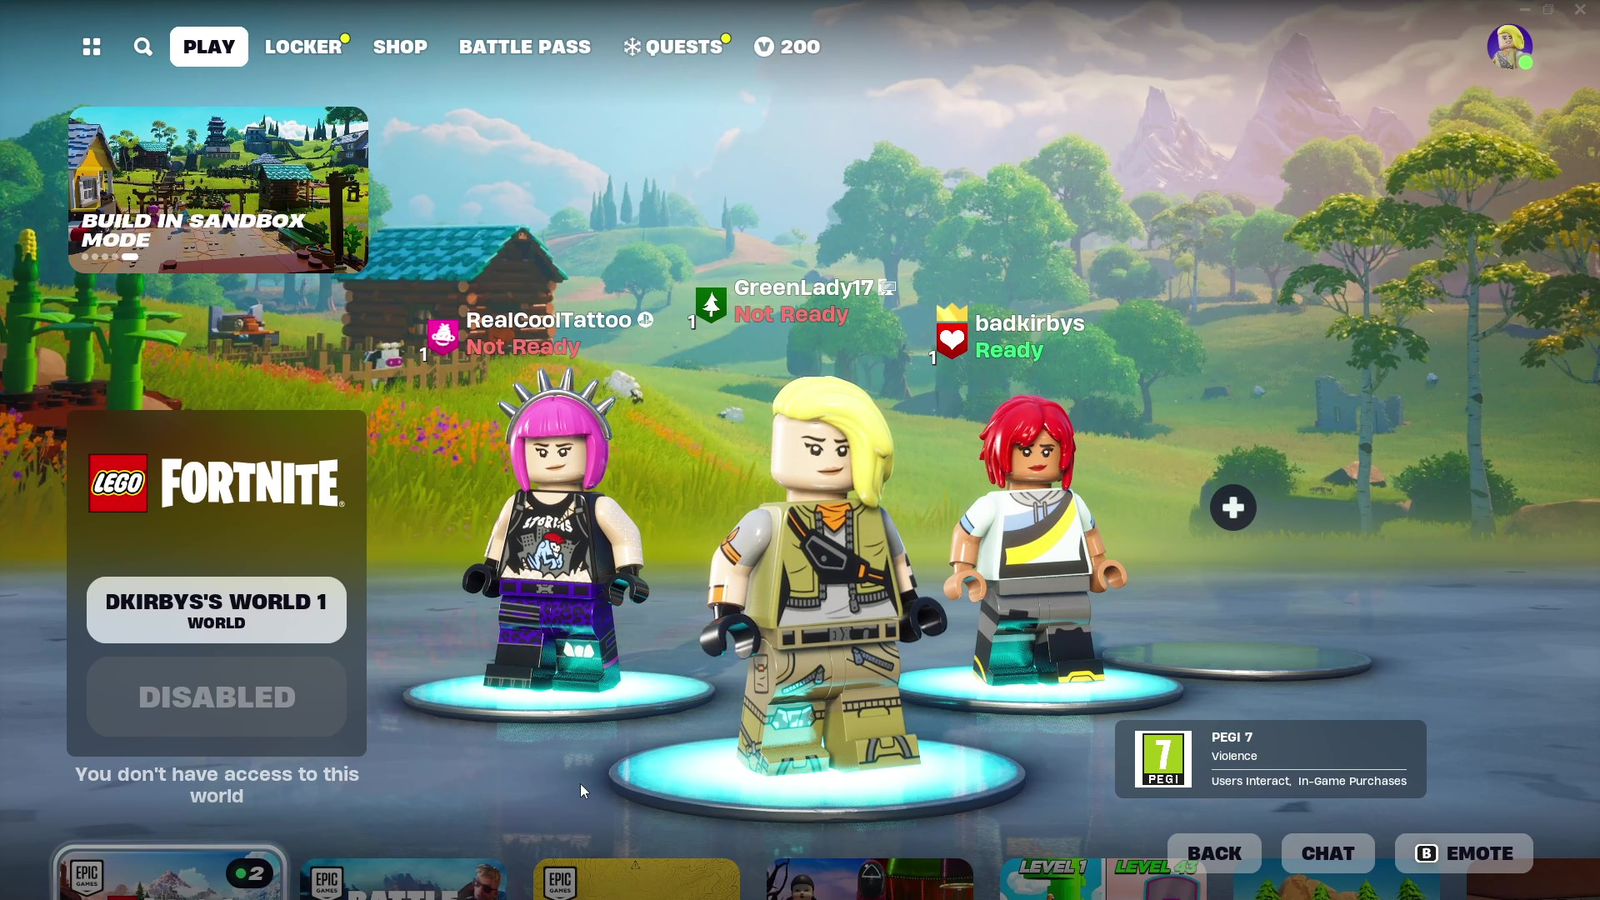 Invite Players to Party Invite Party to Game WHAT NICE LOBBY Party